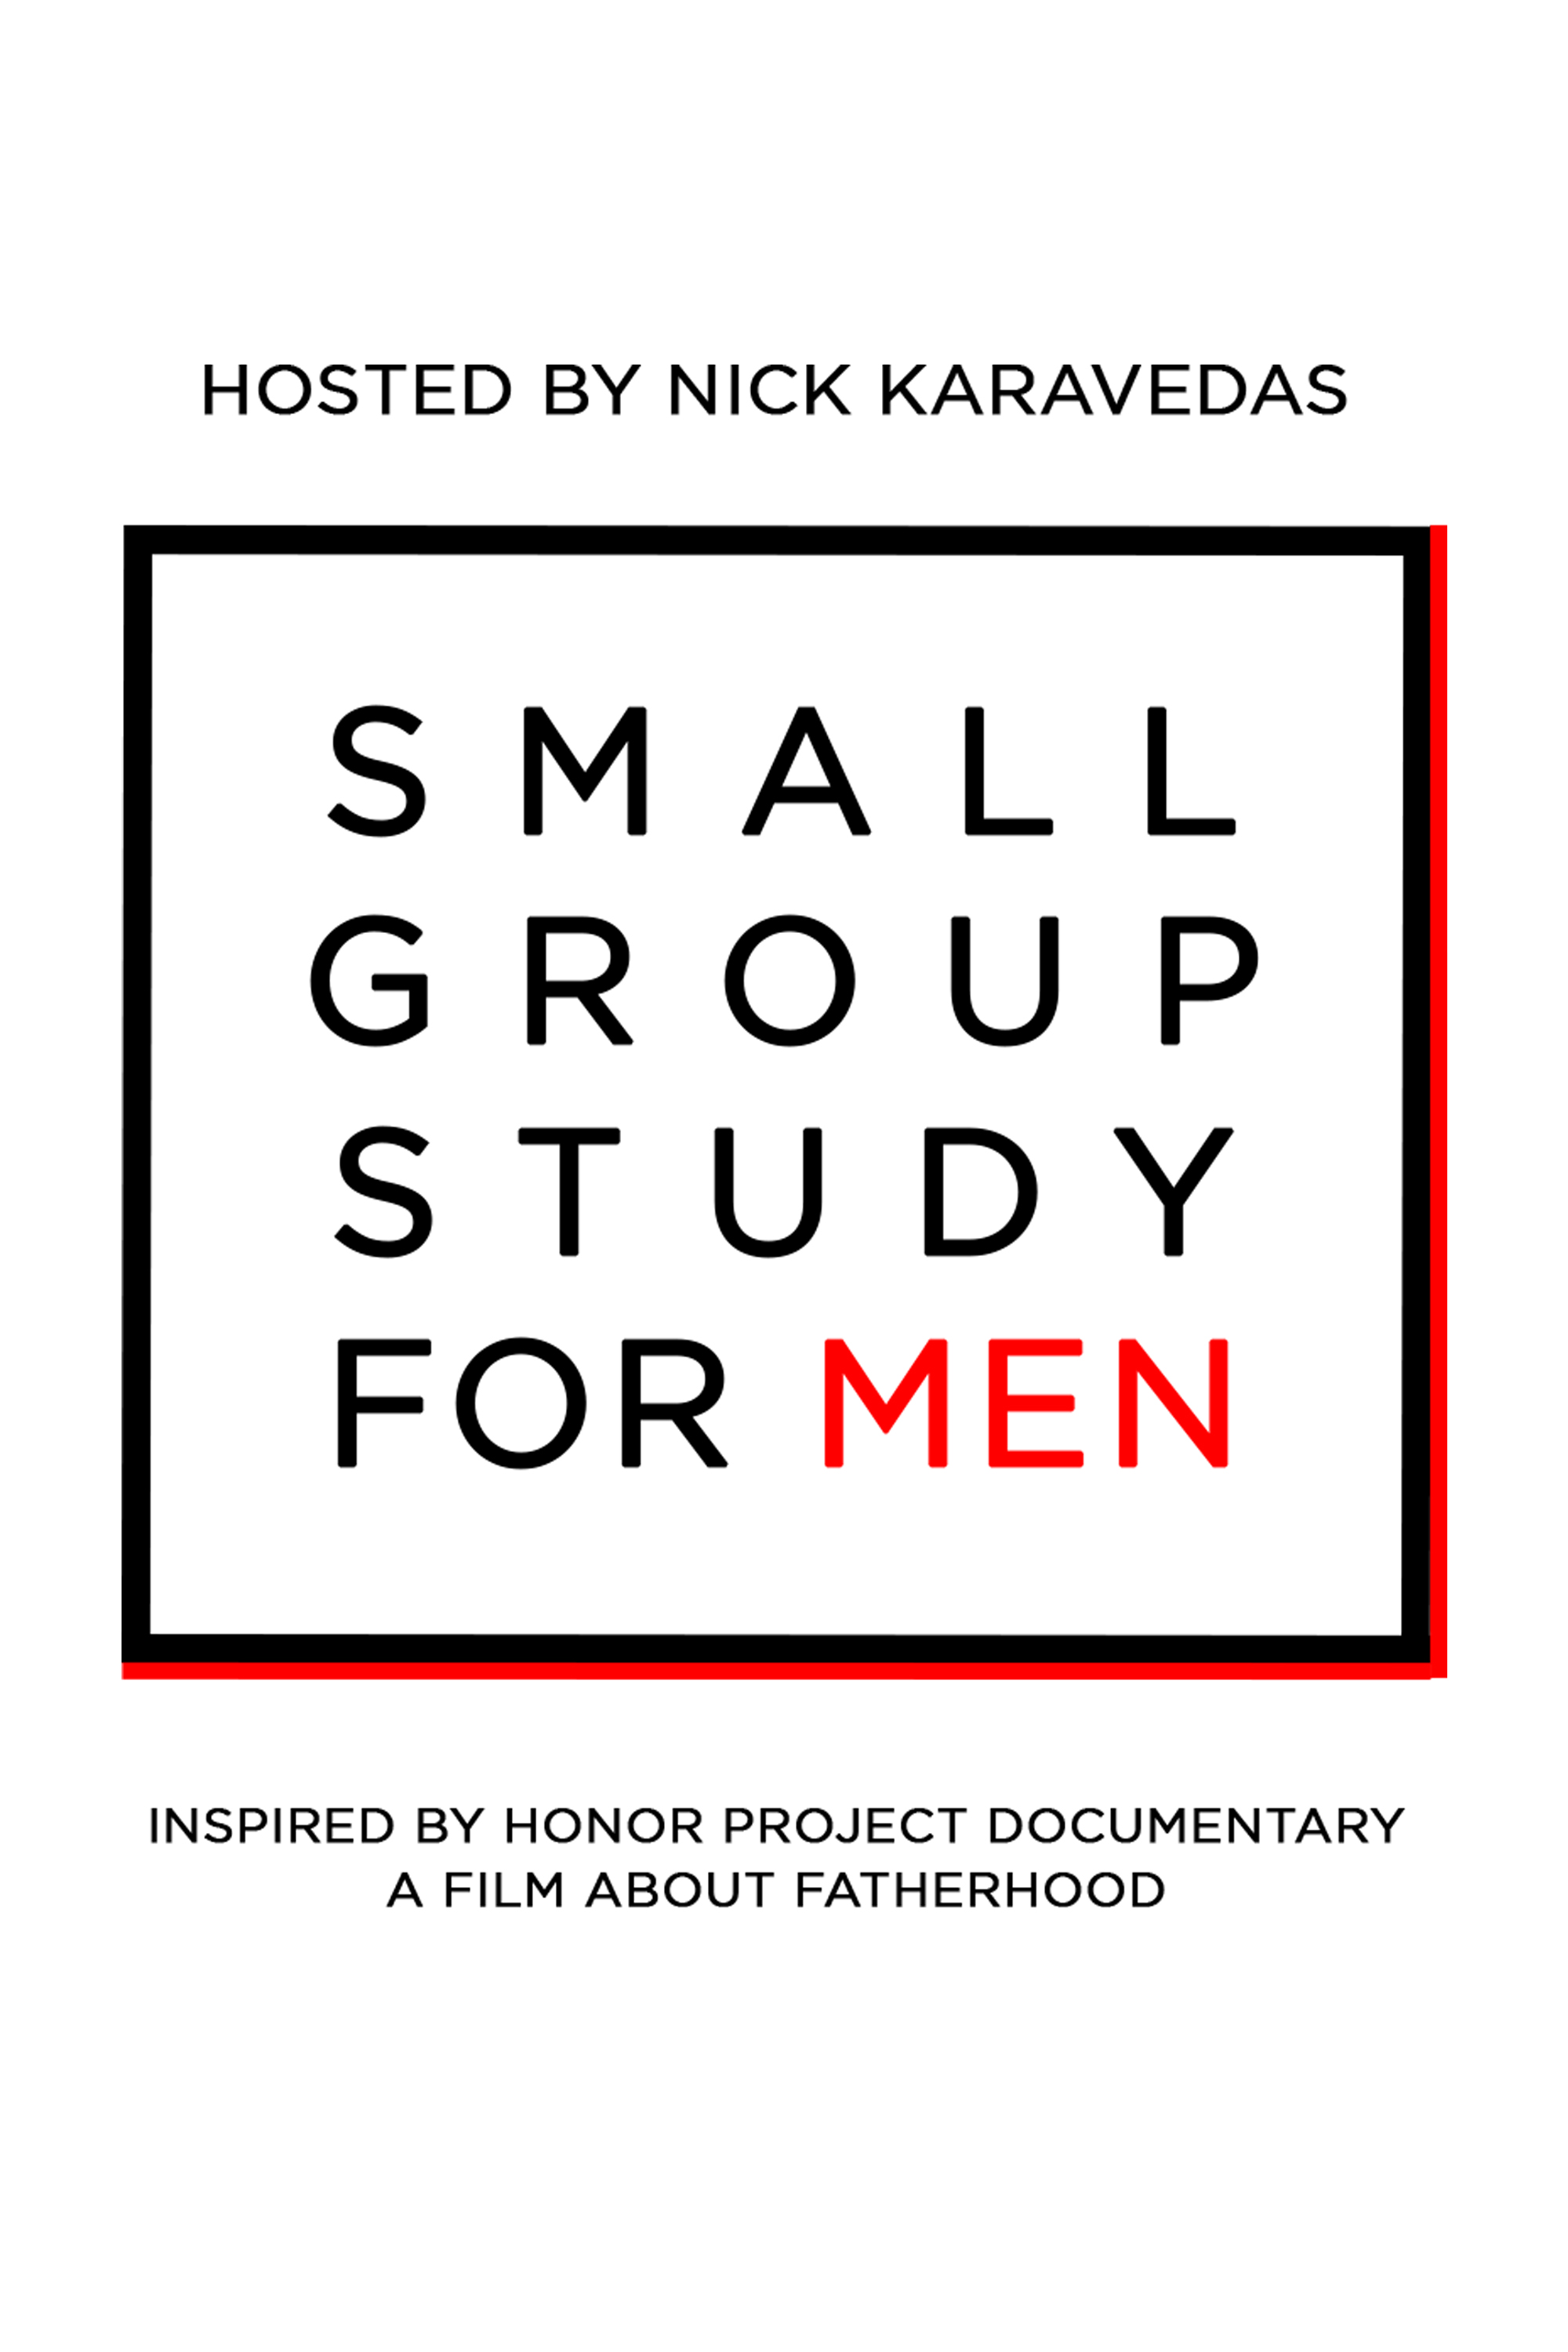 Honor Project Documentary: Small Group Study for Men